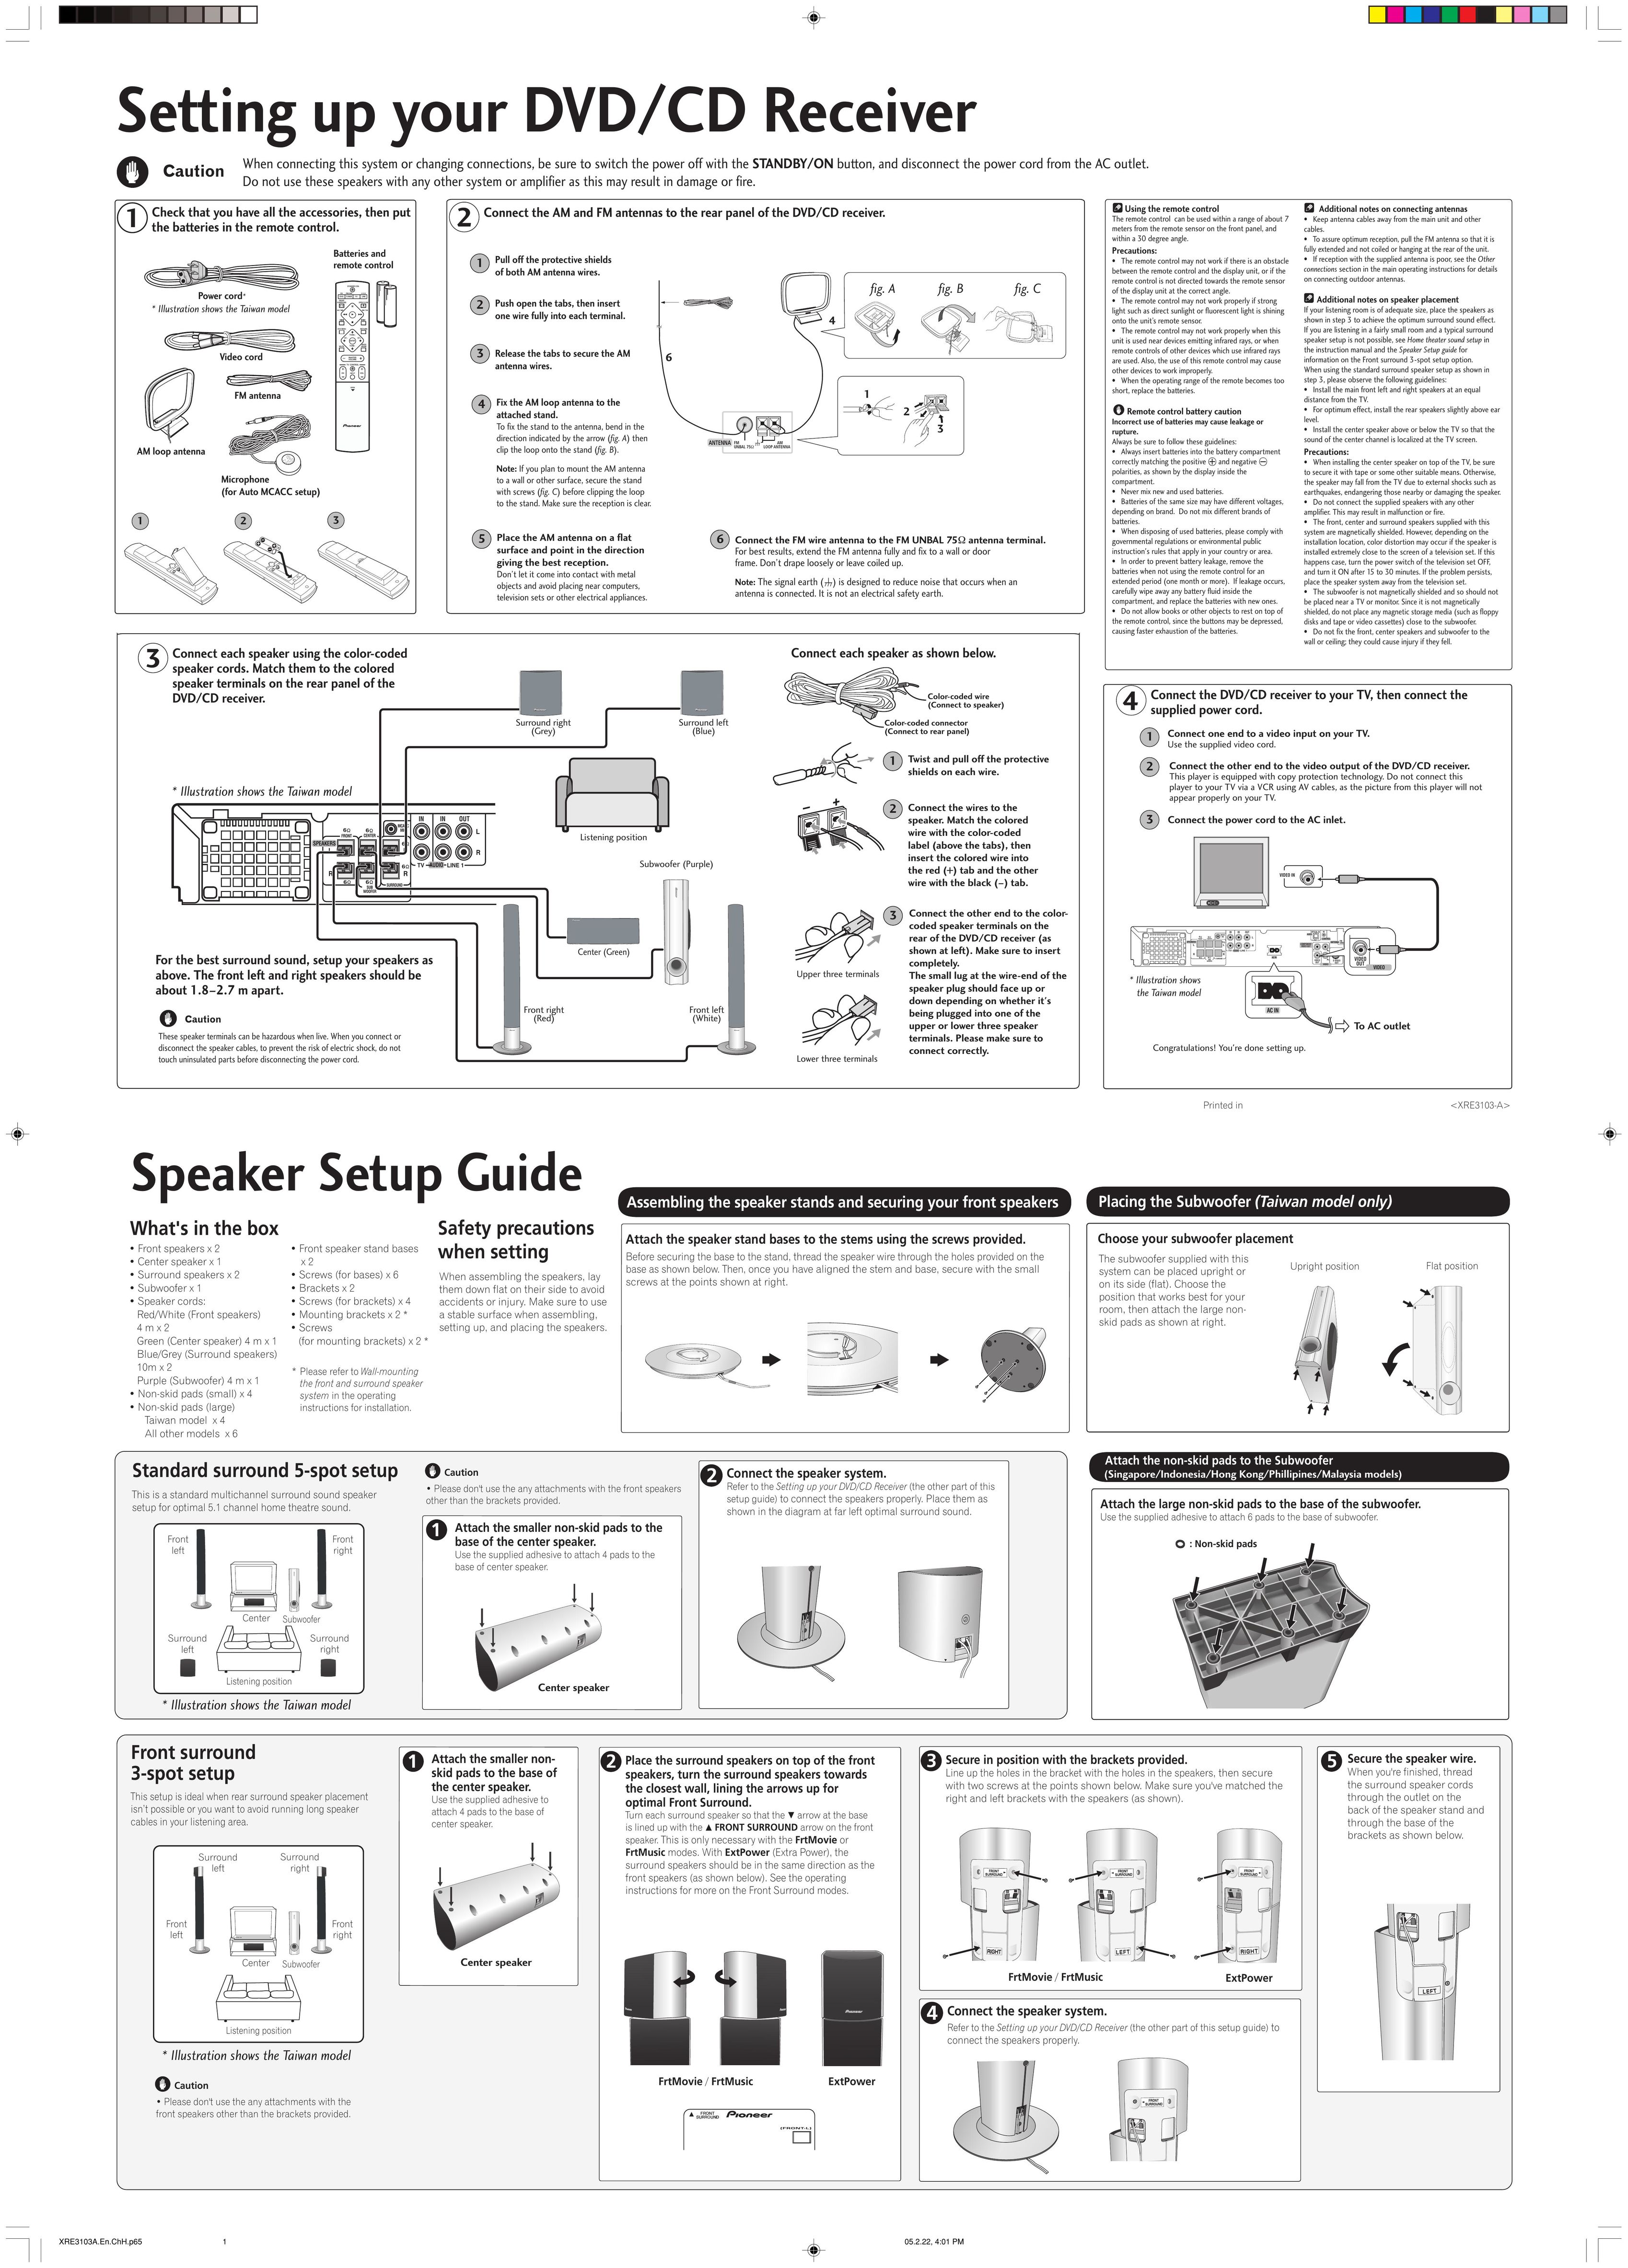 Pioneer HTZ-434DVD Home Theater System User Manual